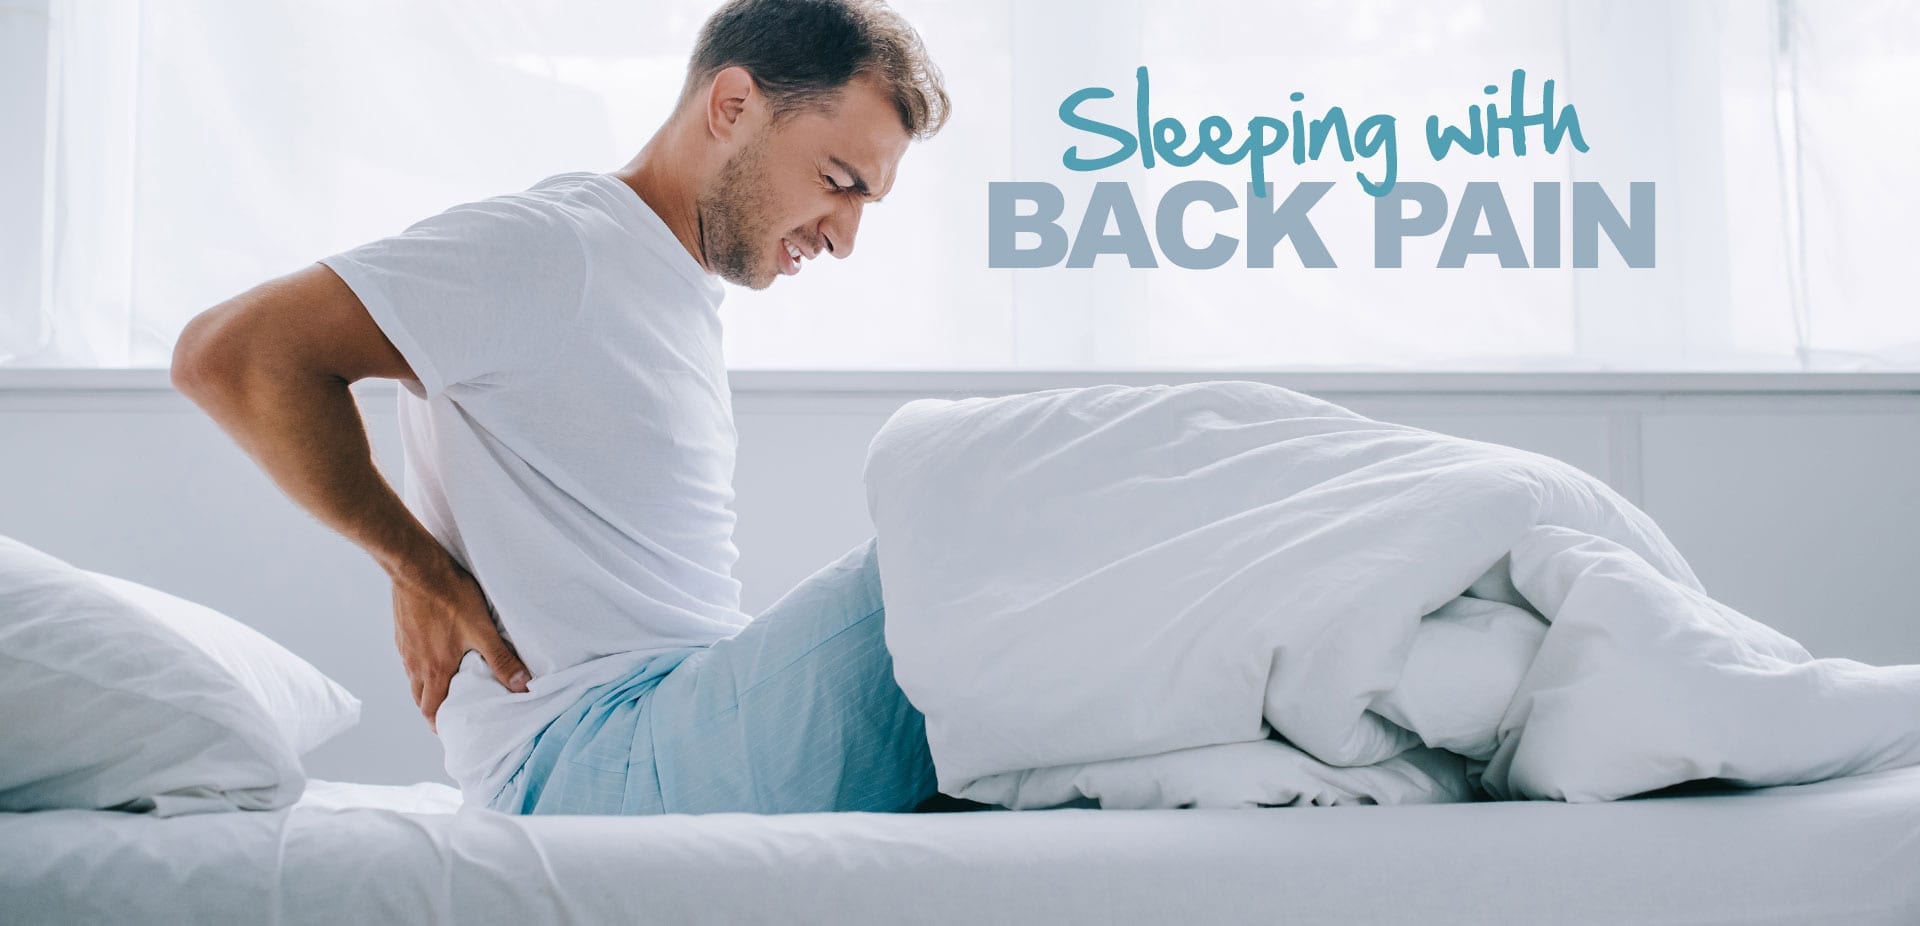 https://zenesse.health/wp-content/uploads/2019/05/Sleeping-with-back-pain.jpg